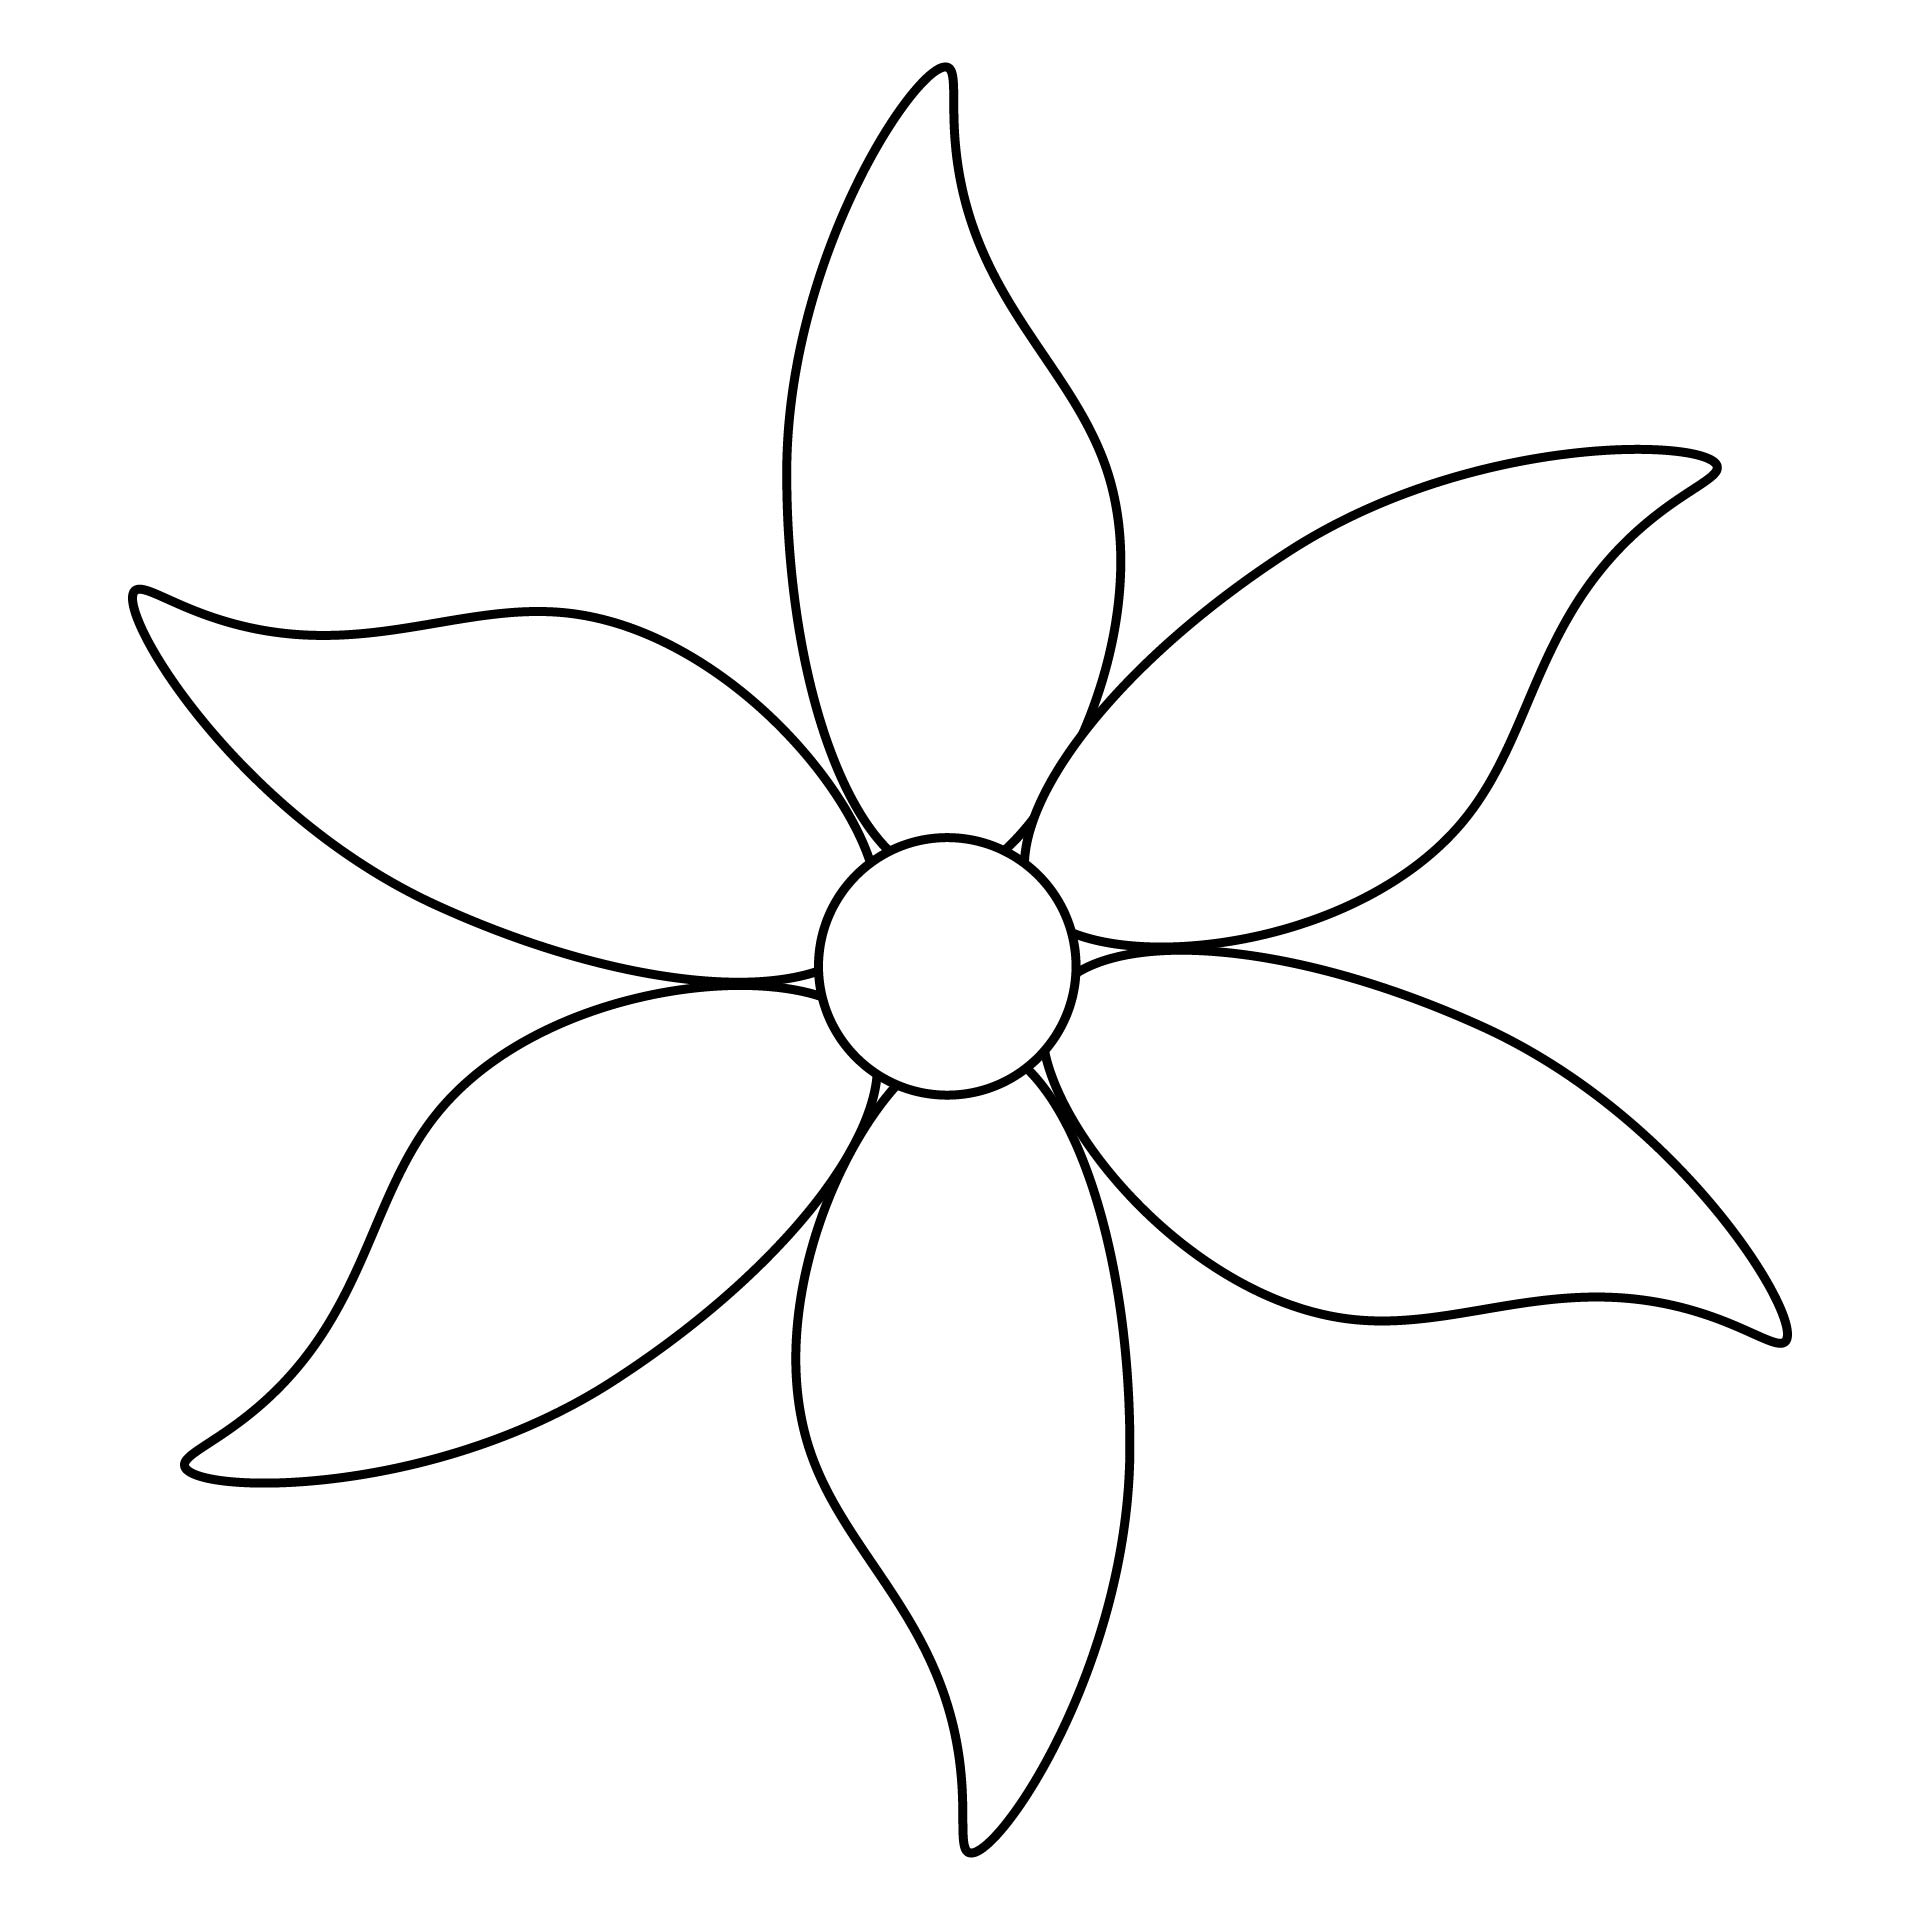 petal flower template free printable this site uses cookies including